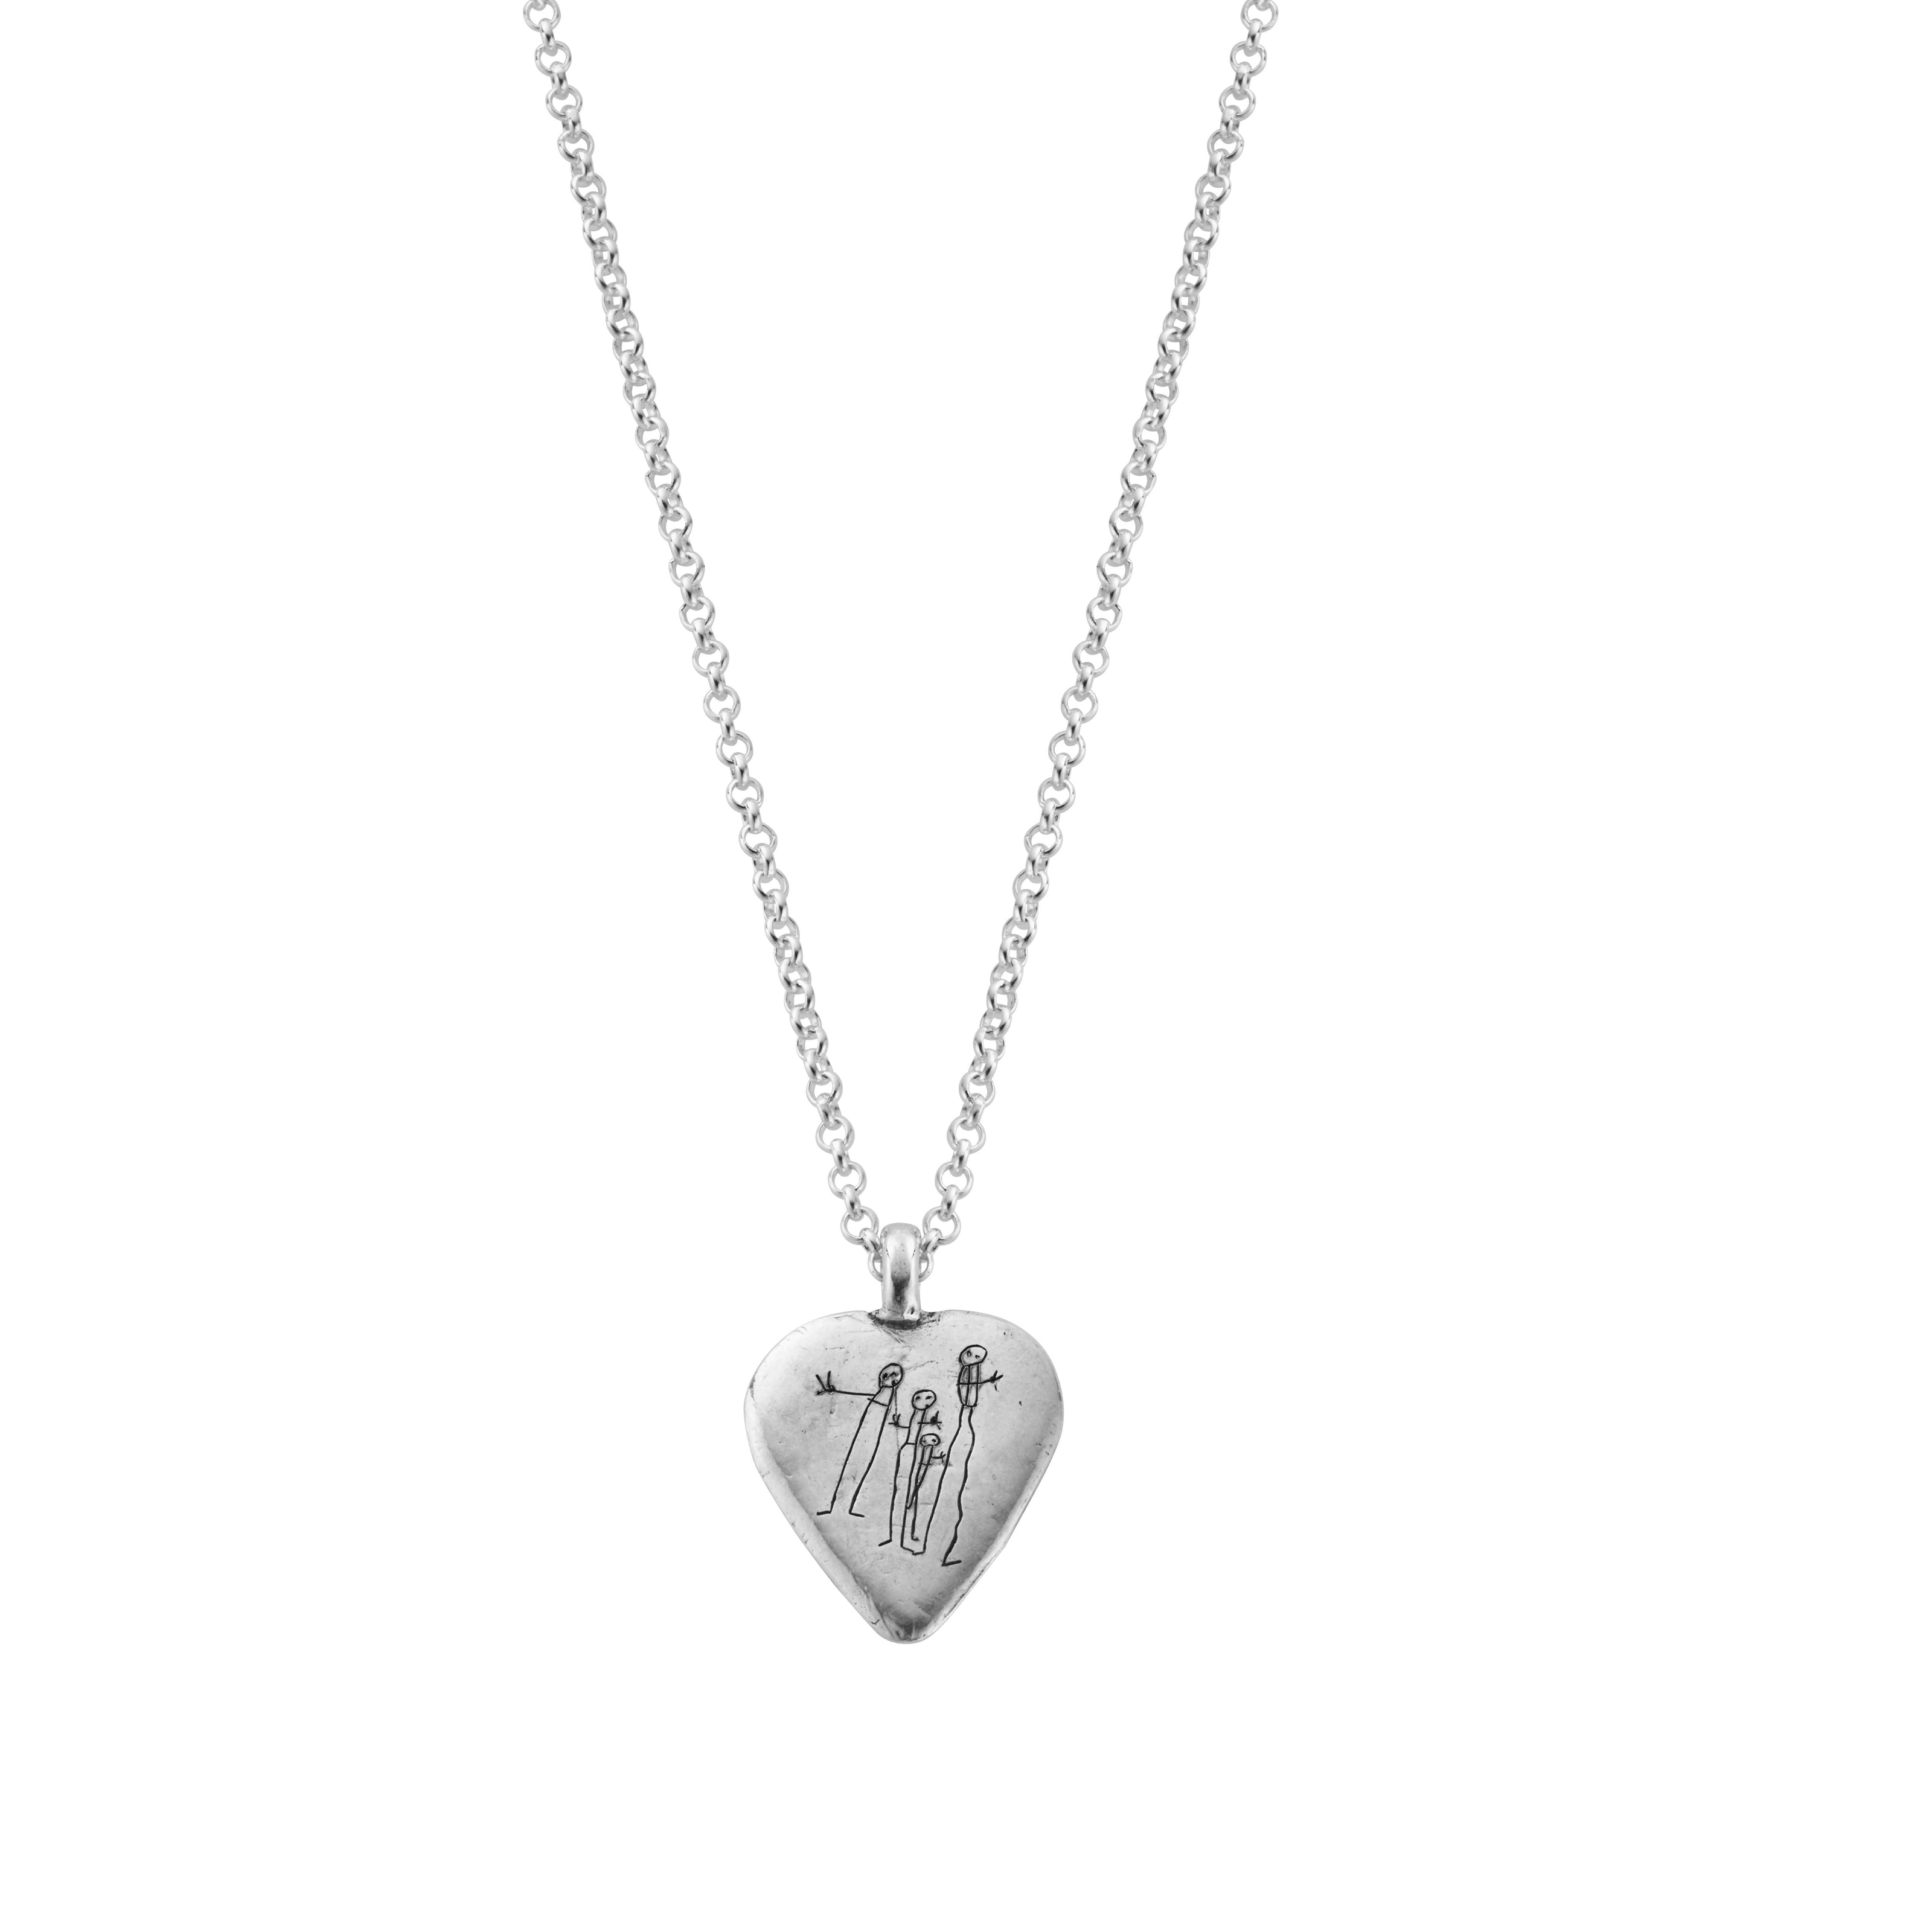 Silver Large Happy Heart Necklace with Handwriting